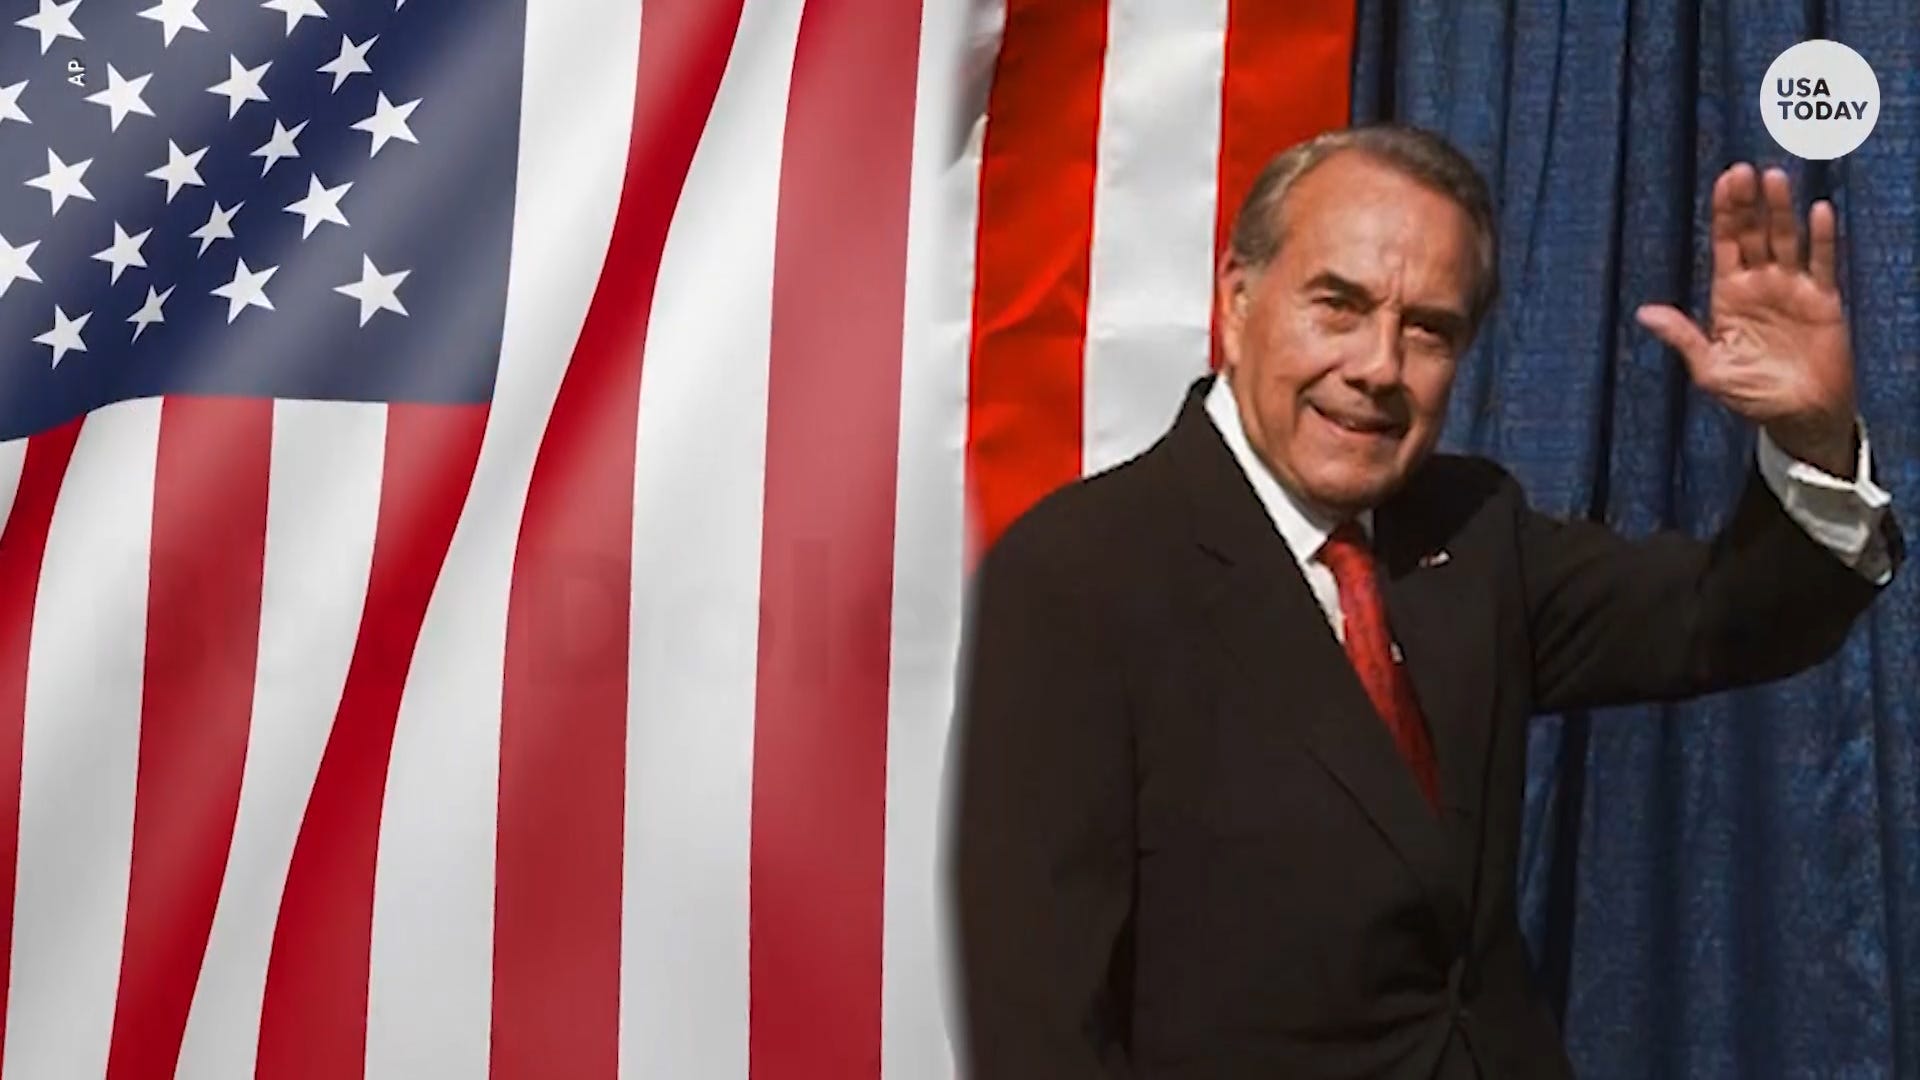 Bob Dole served his country from WWII battlefields to the US Capitol and beyond